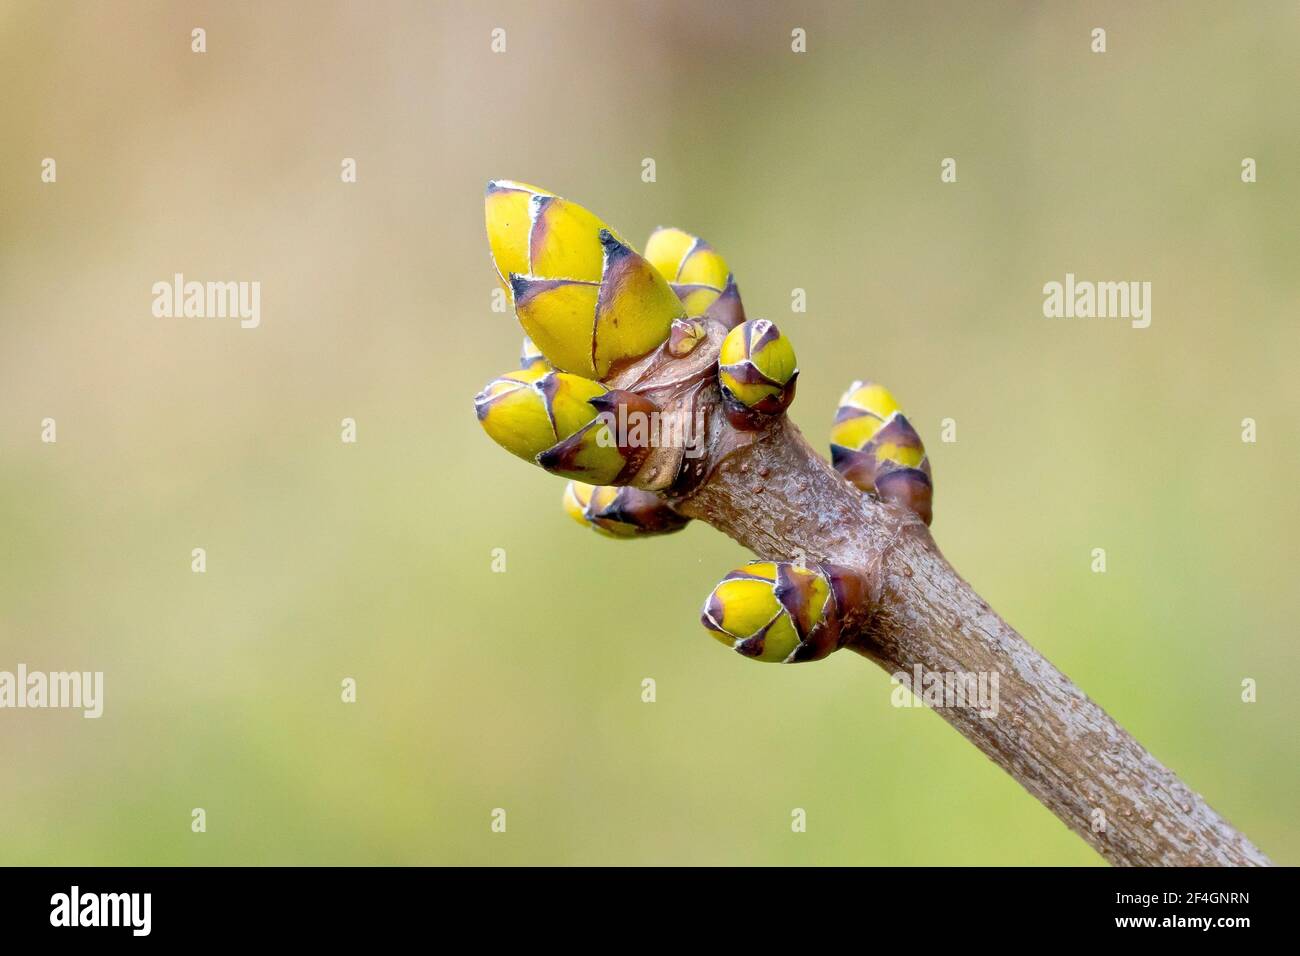 Sycamore leaf buds (acer pseudoplatanus), close up showing a cluster of buds at the end of a branch. Stock Photo